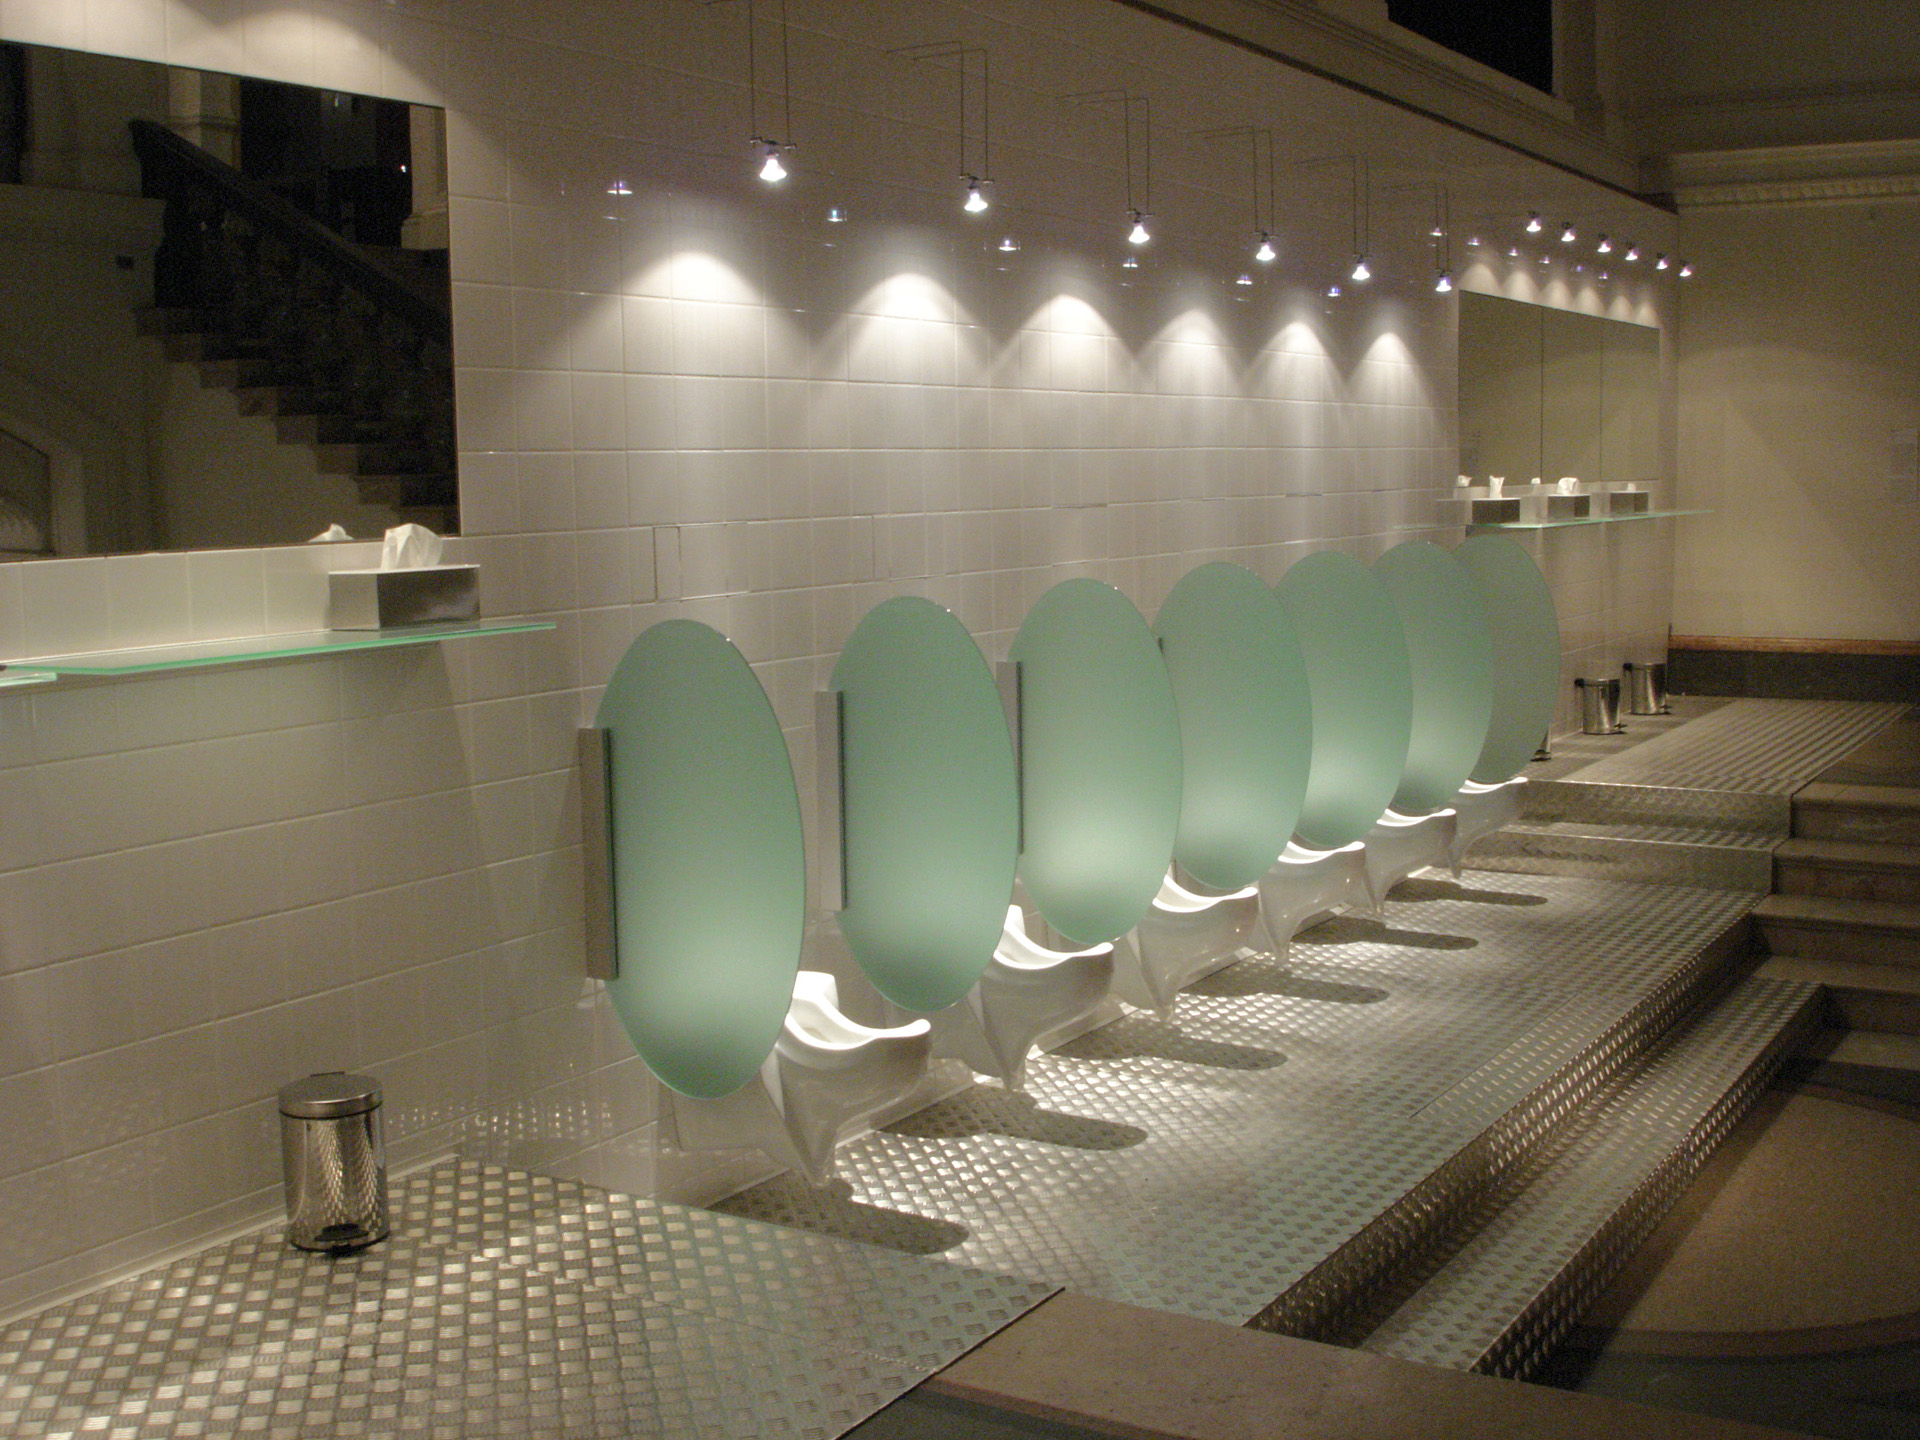 Urinals For Women, Mixed Materials 14 X 2 X 3 Mt - Architecture , HD Wallpaper & Backgrounds